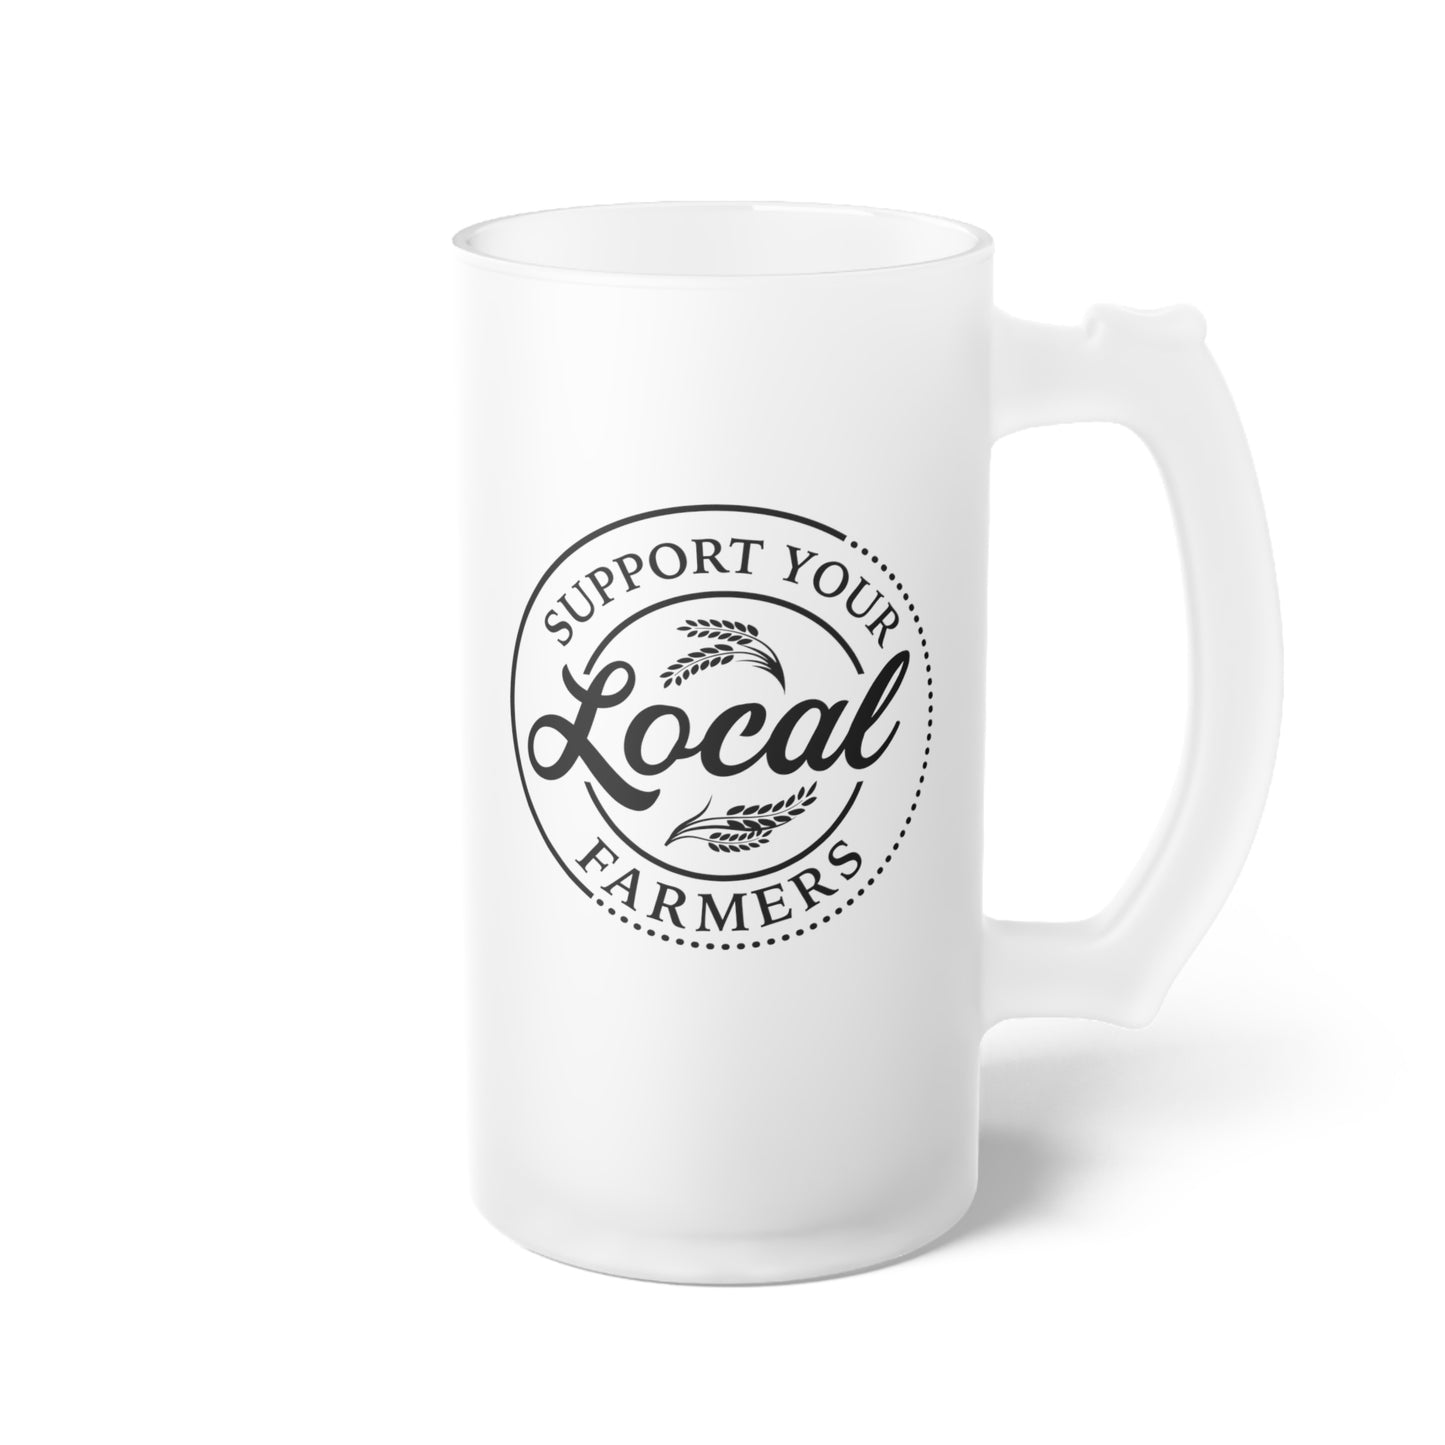 Support Your Local Farmers Frosted Glass Beer Mug